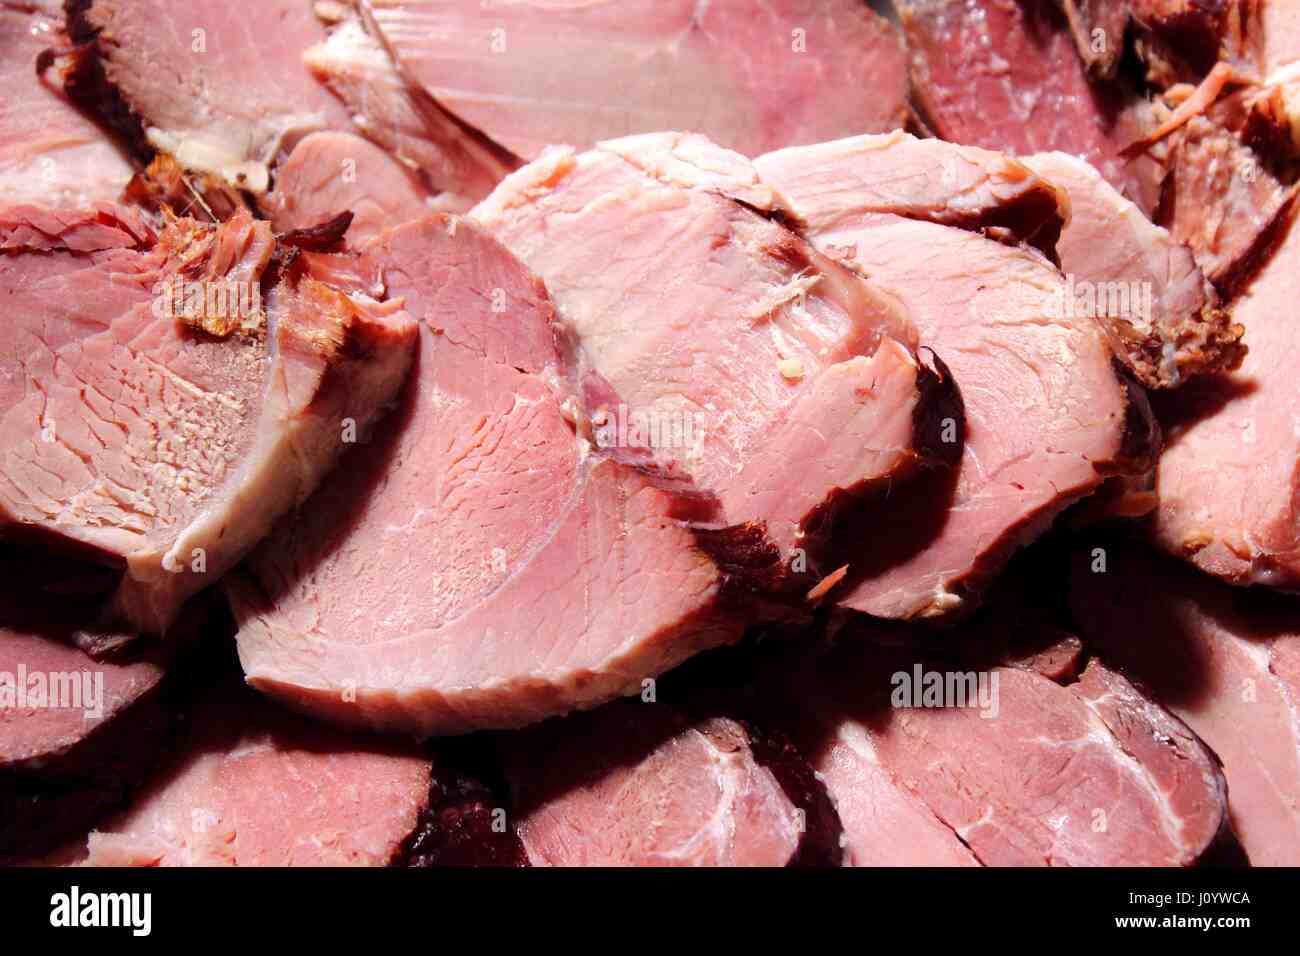 Is ham supposed to be pink when cooked?